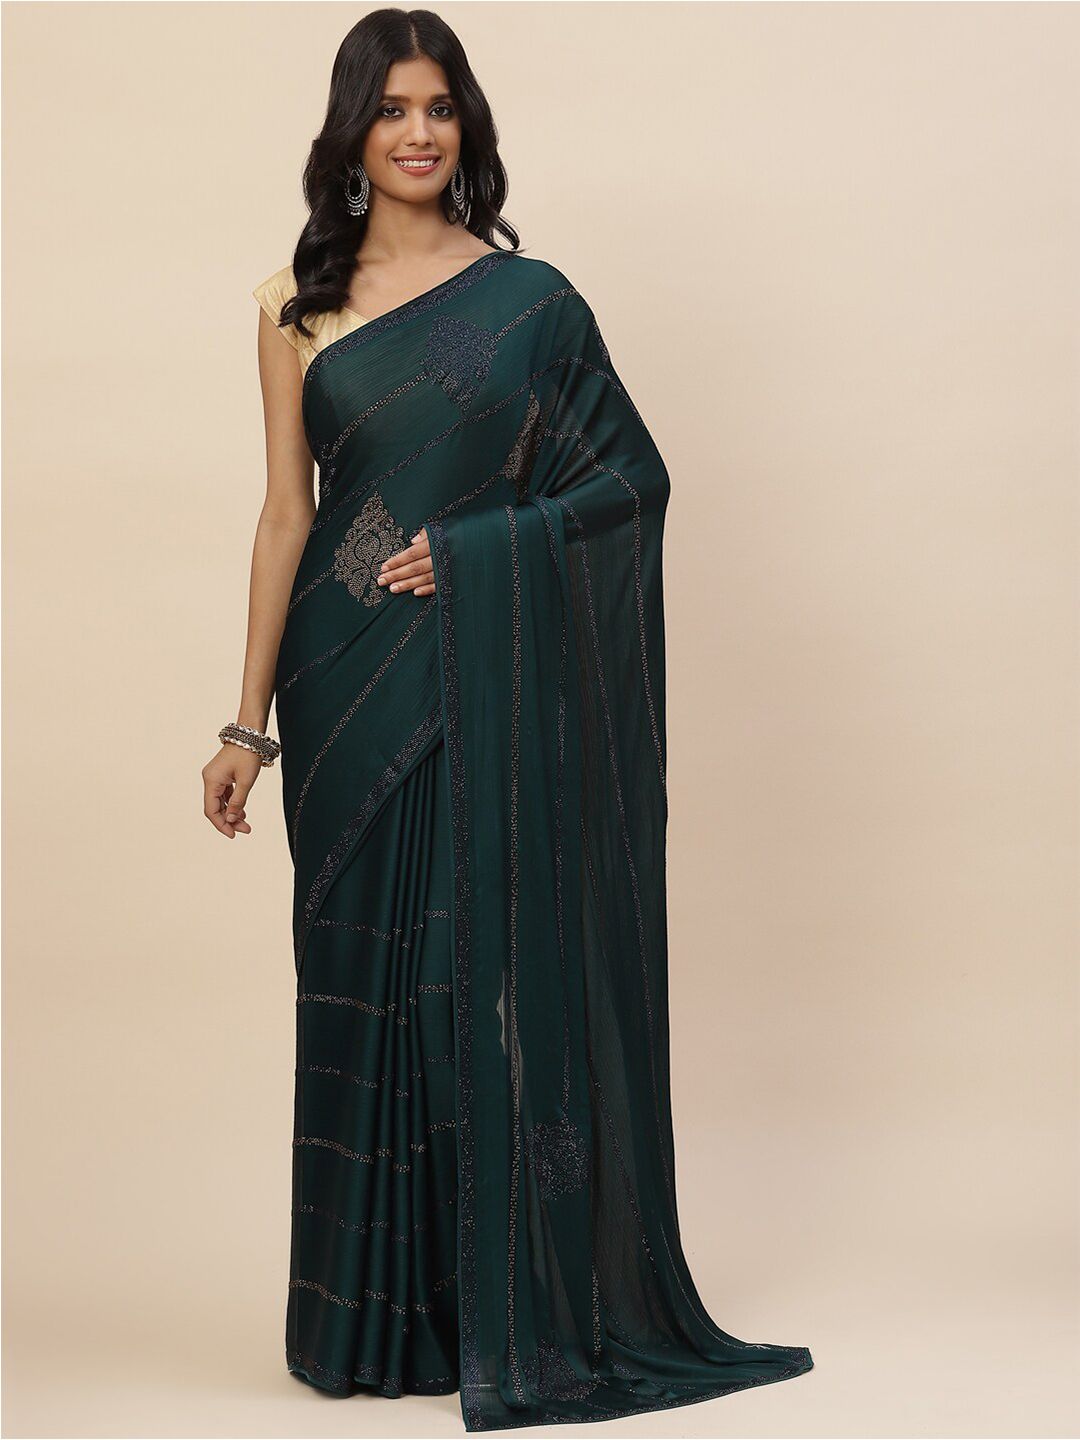 Meena Bazaar Women Green & Gold-Toned Floral Embroidered Saree Price in India